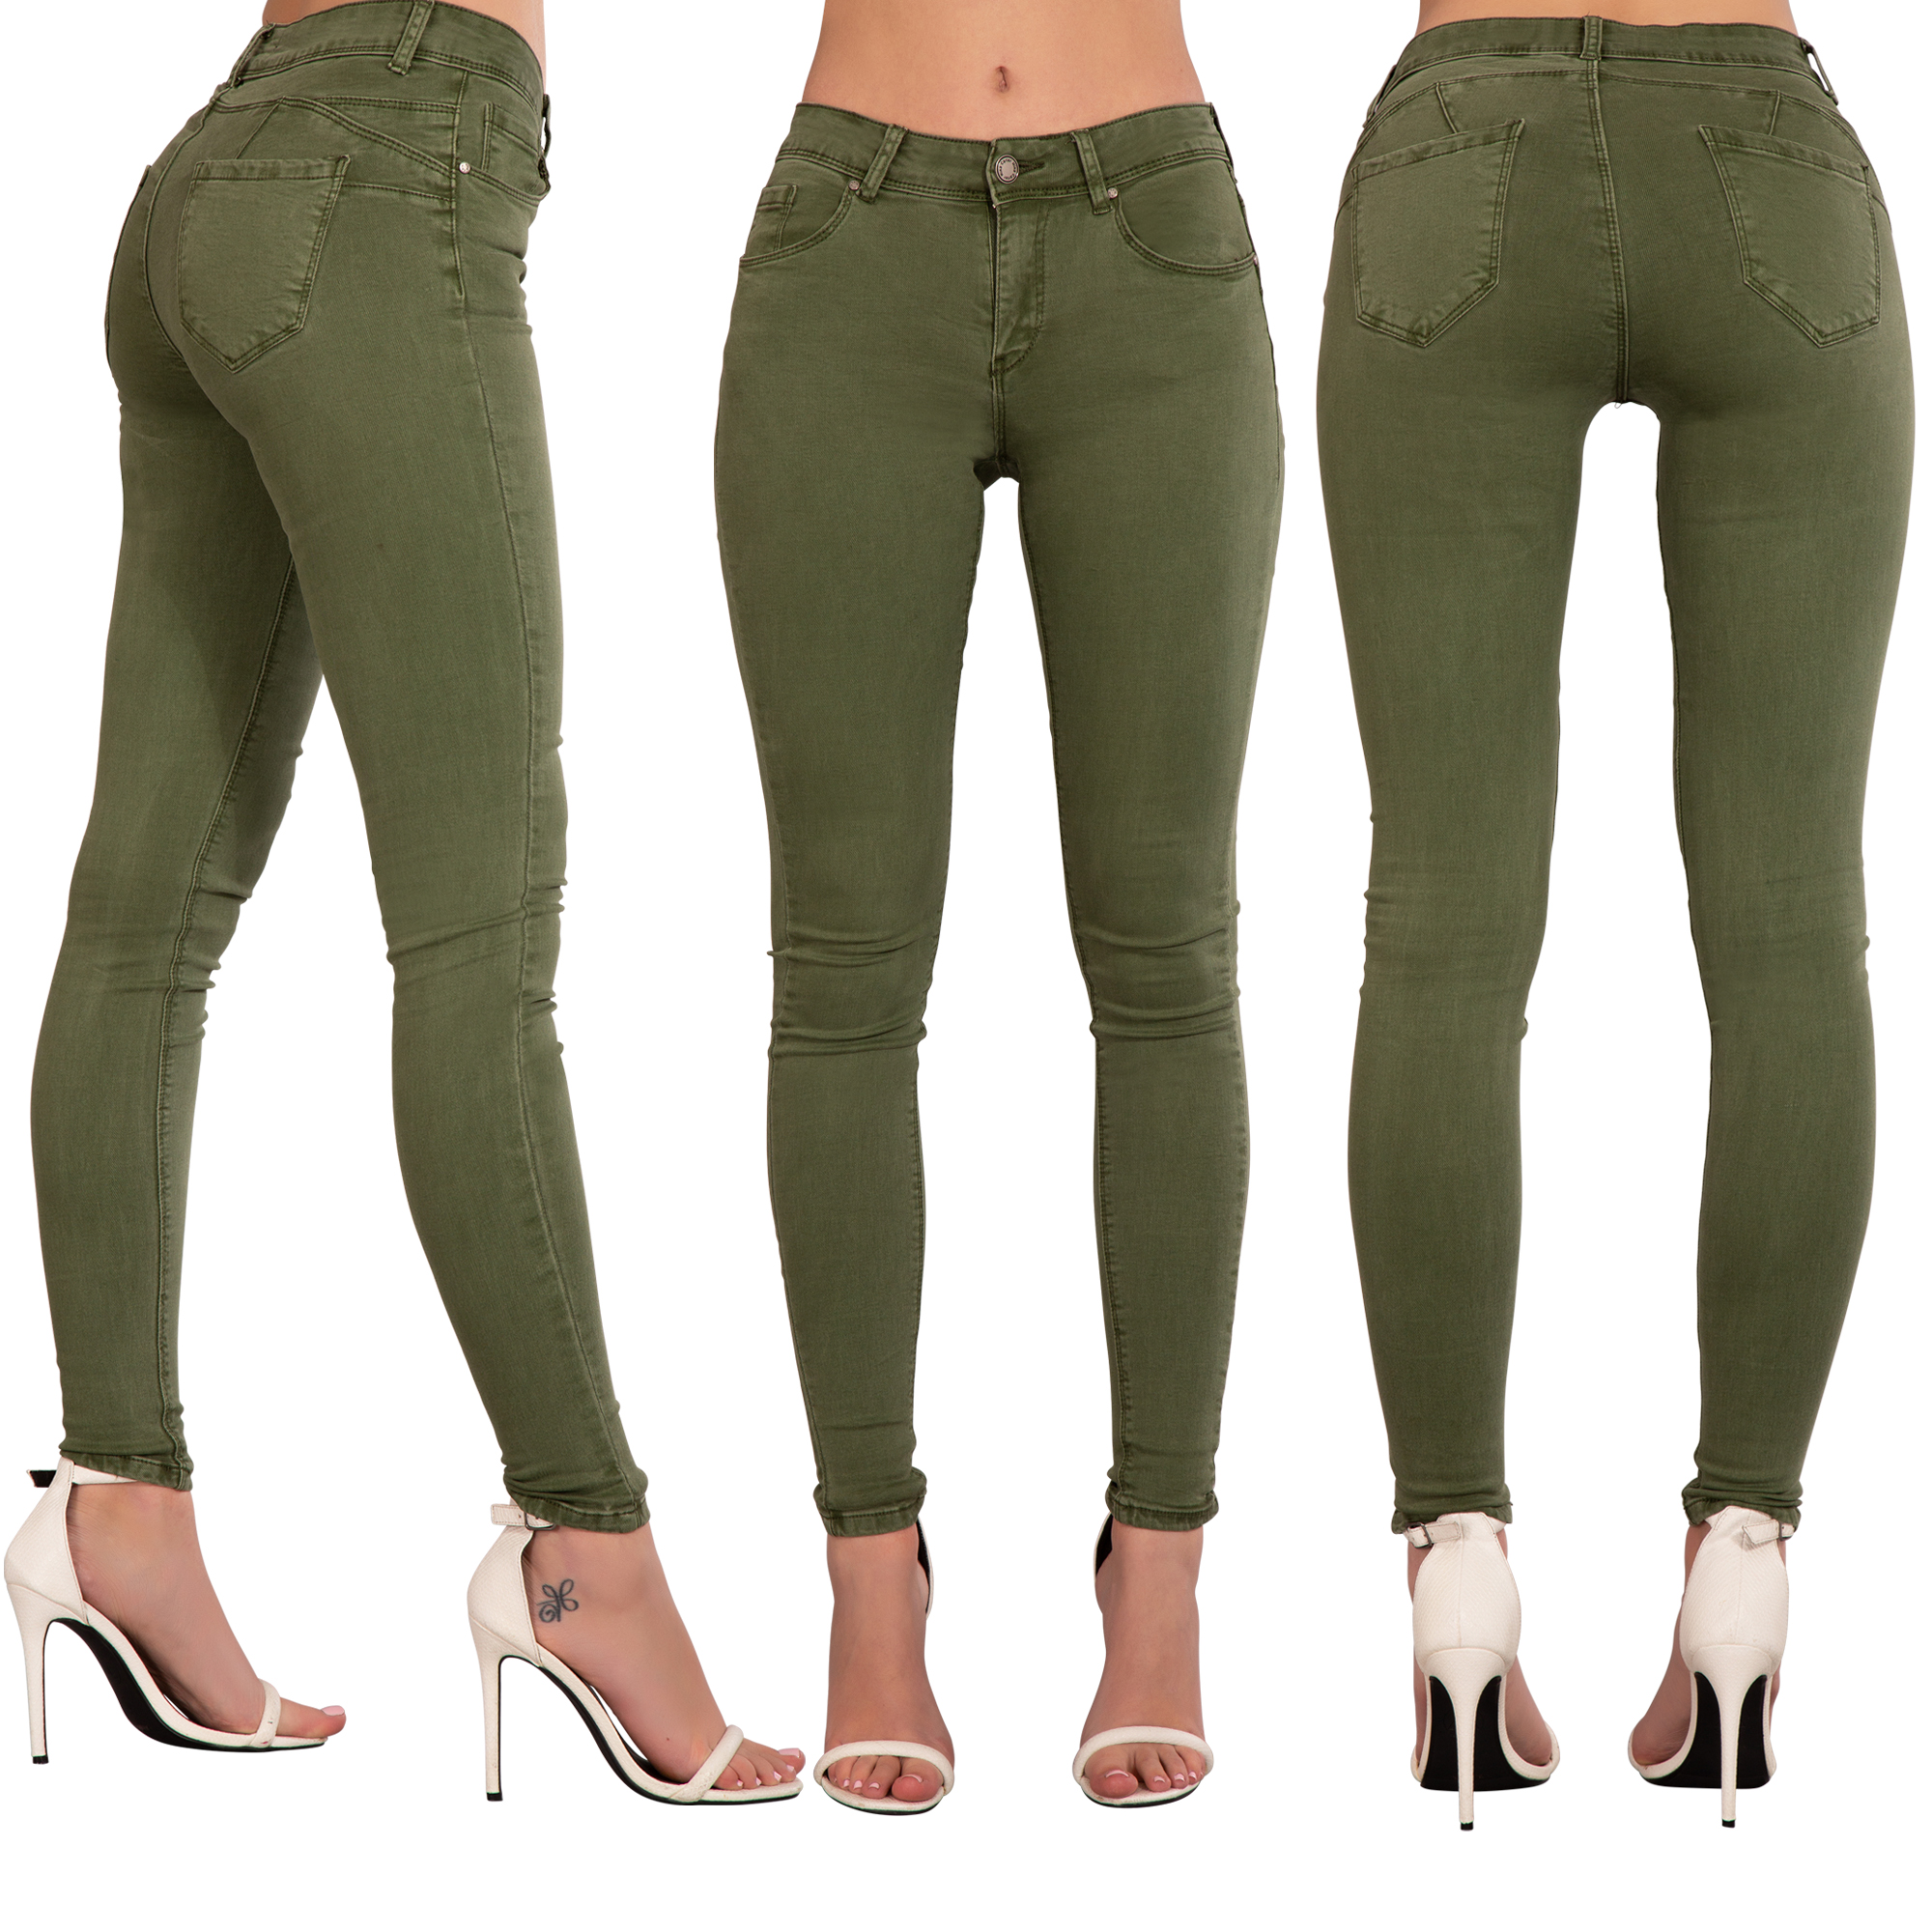 Womens Sexy Push Up Skinny Jeans Ladies Mid Waist Denim Trousers Size ...